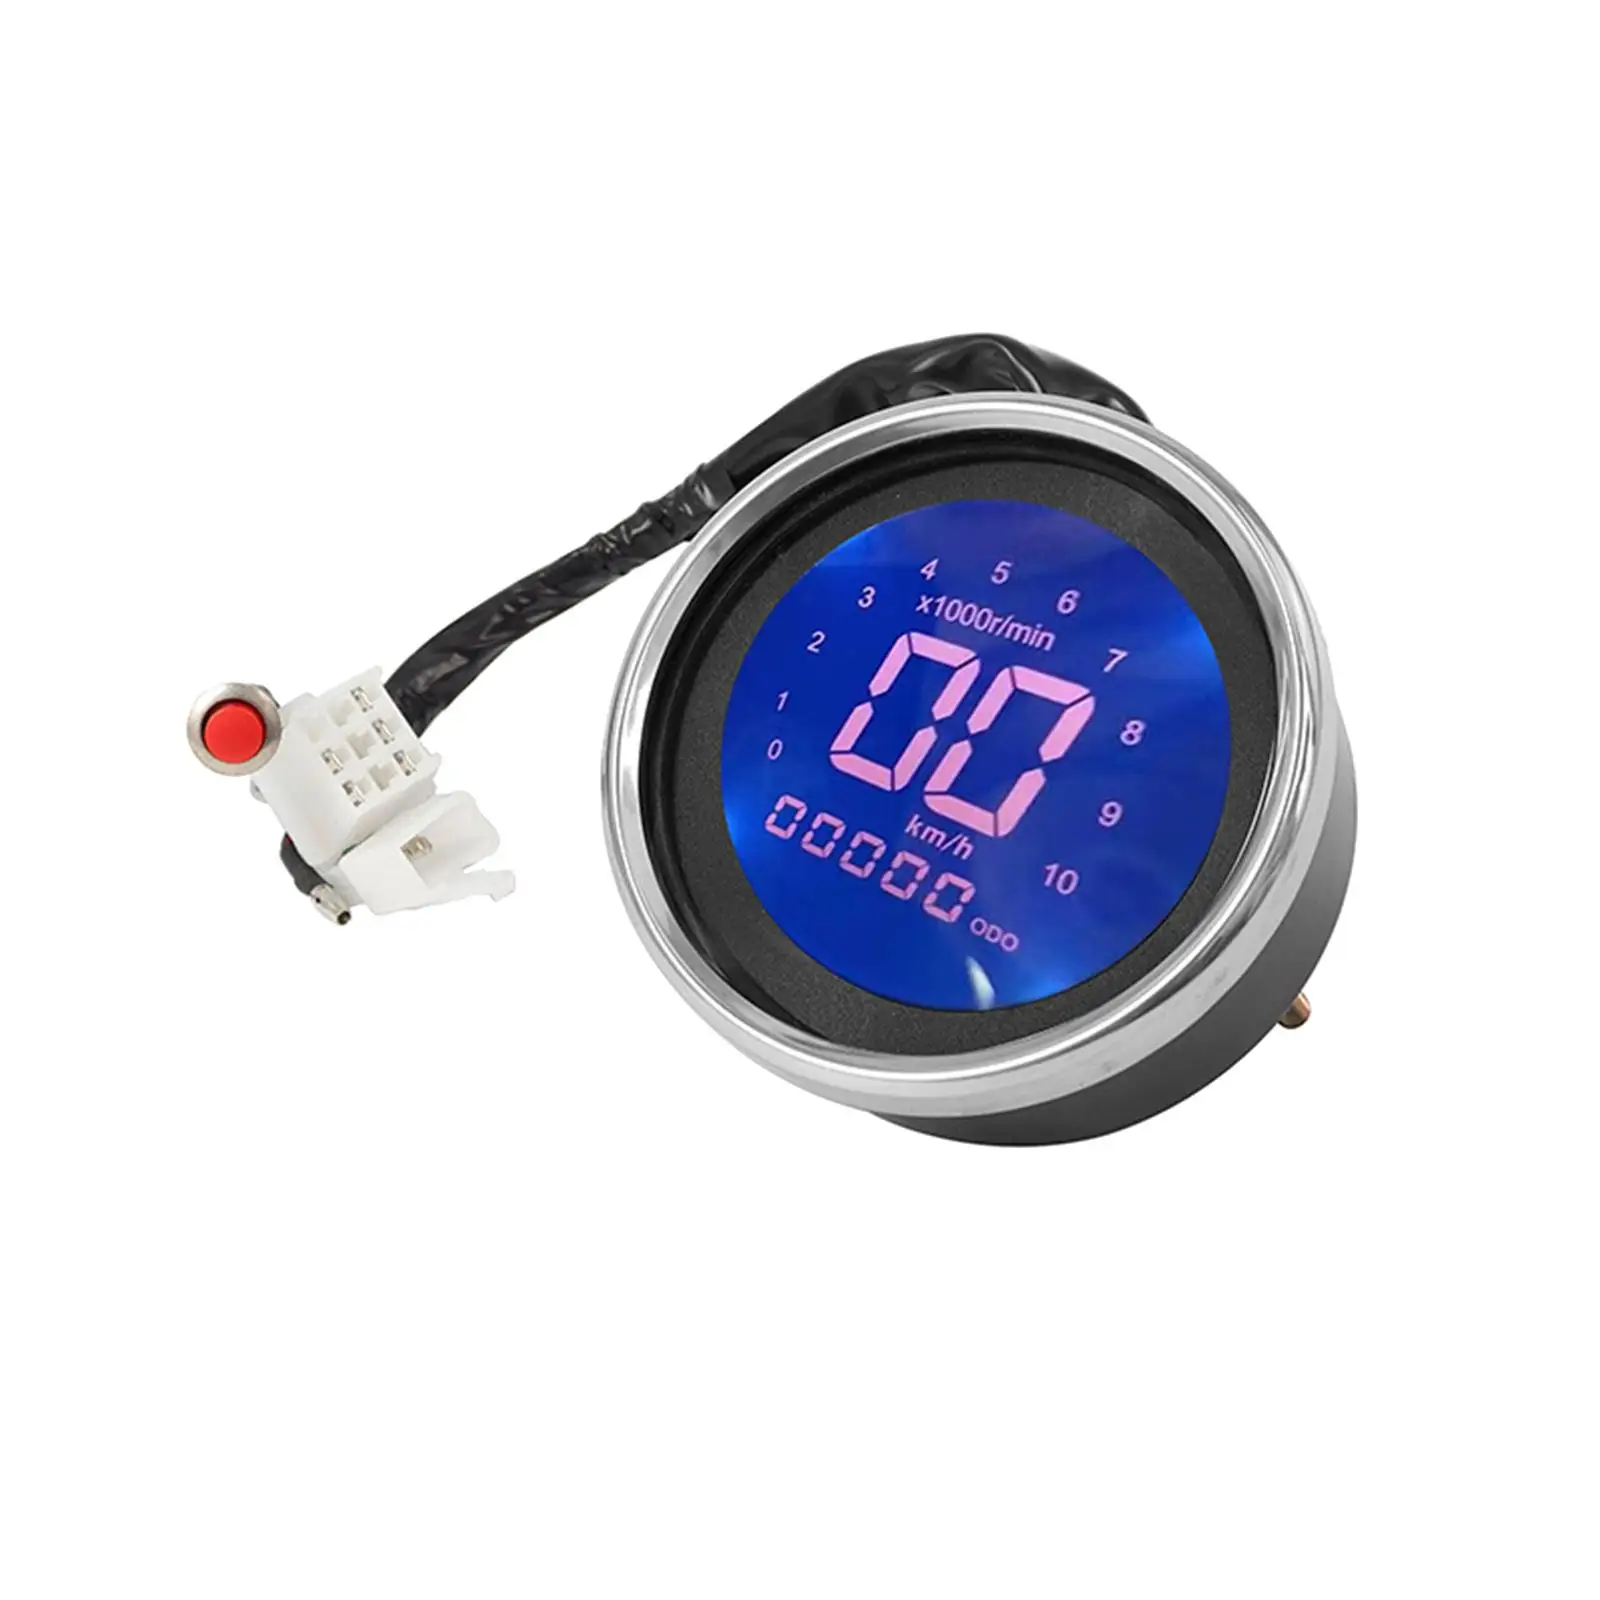 Digital Gauge Universal Motorcycle Speedometer Waterproof Shell Modification Accessory Fashion Appearance Easily Install Sturdy